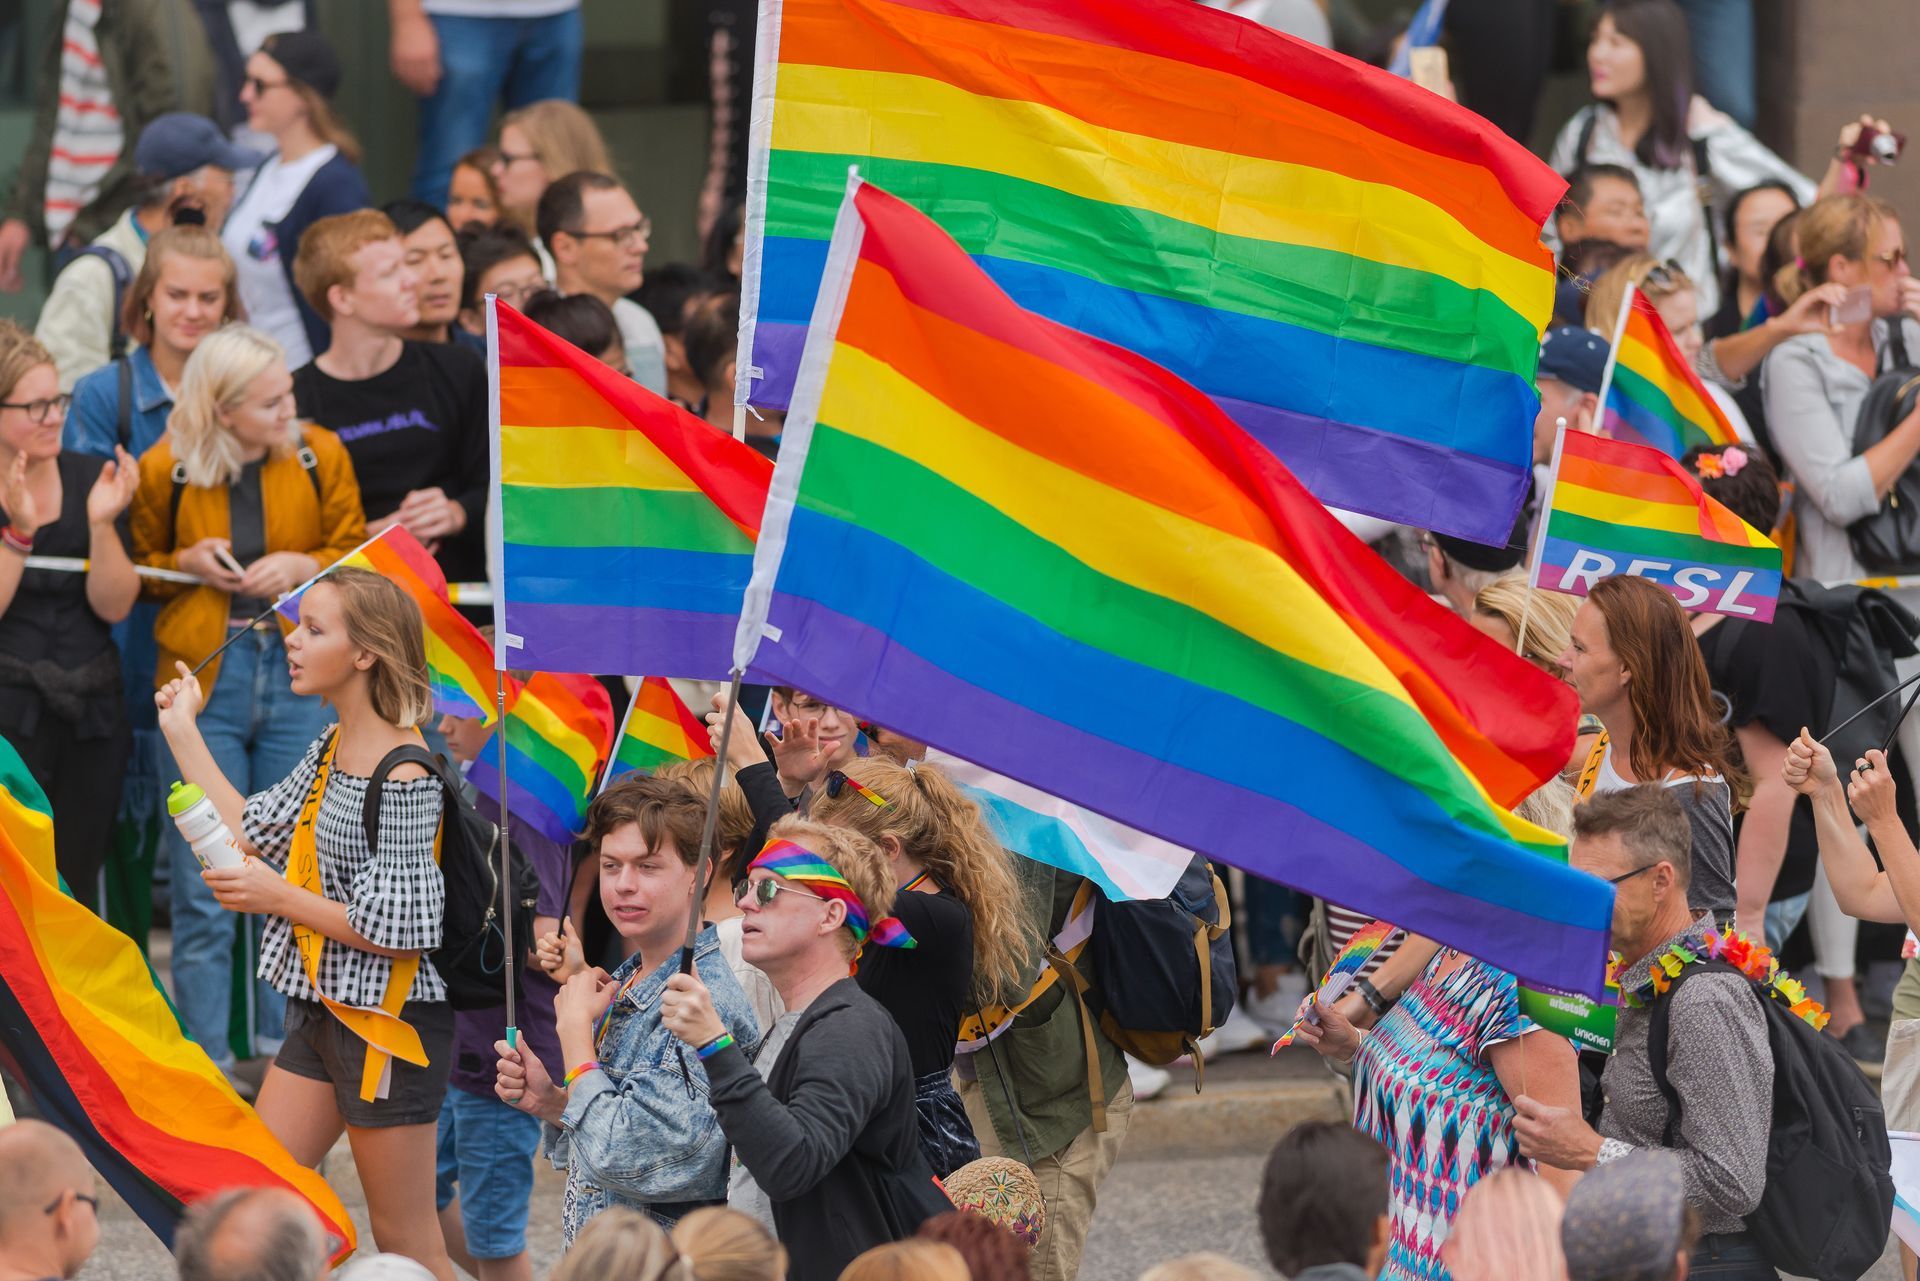 a crowd of people are holding rainbow flags in a parade .